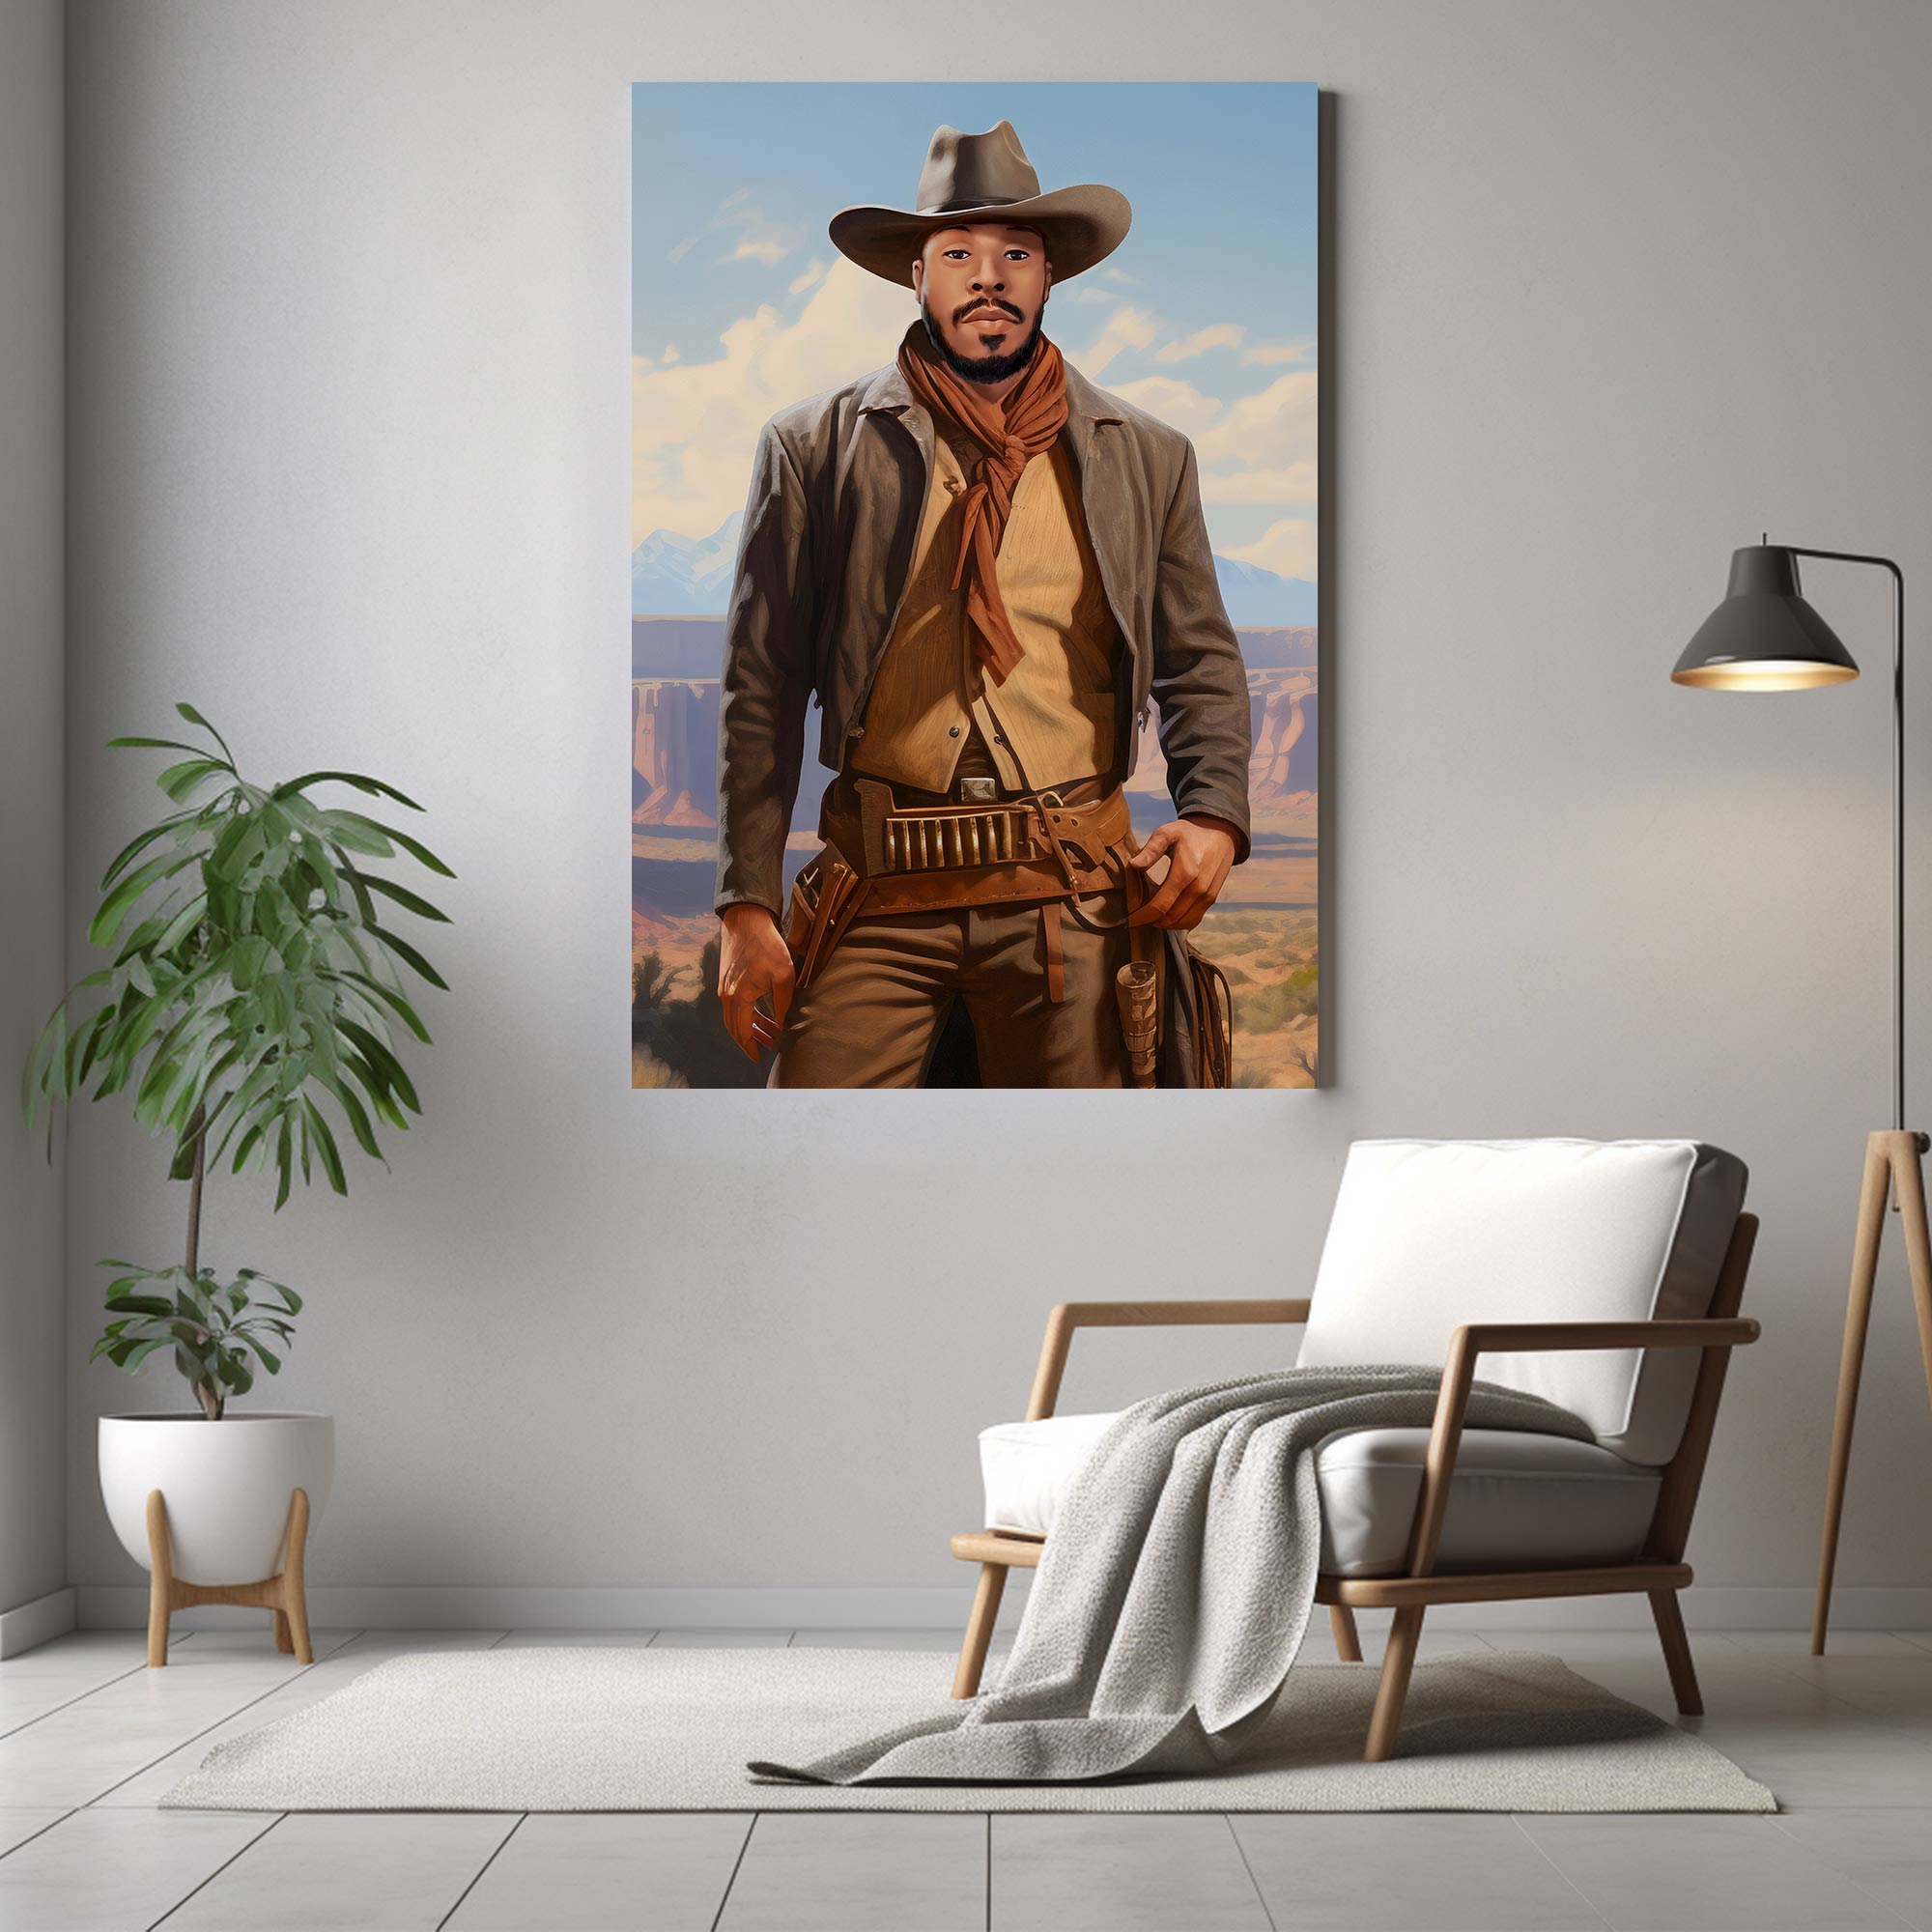 cowboy portrait on the wall image